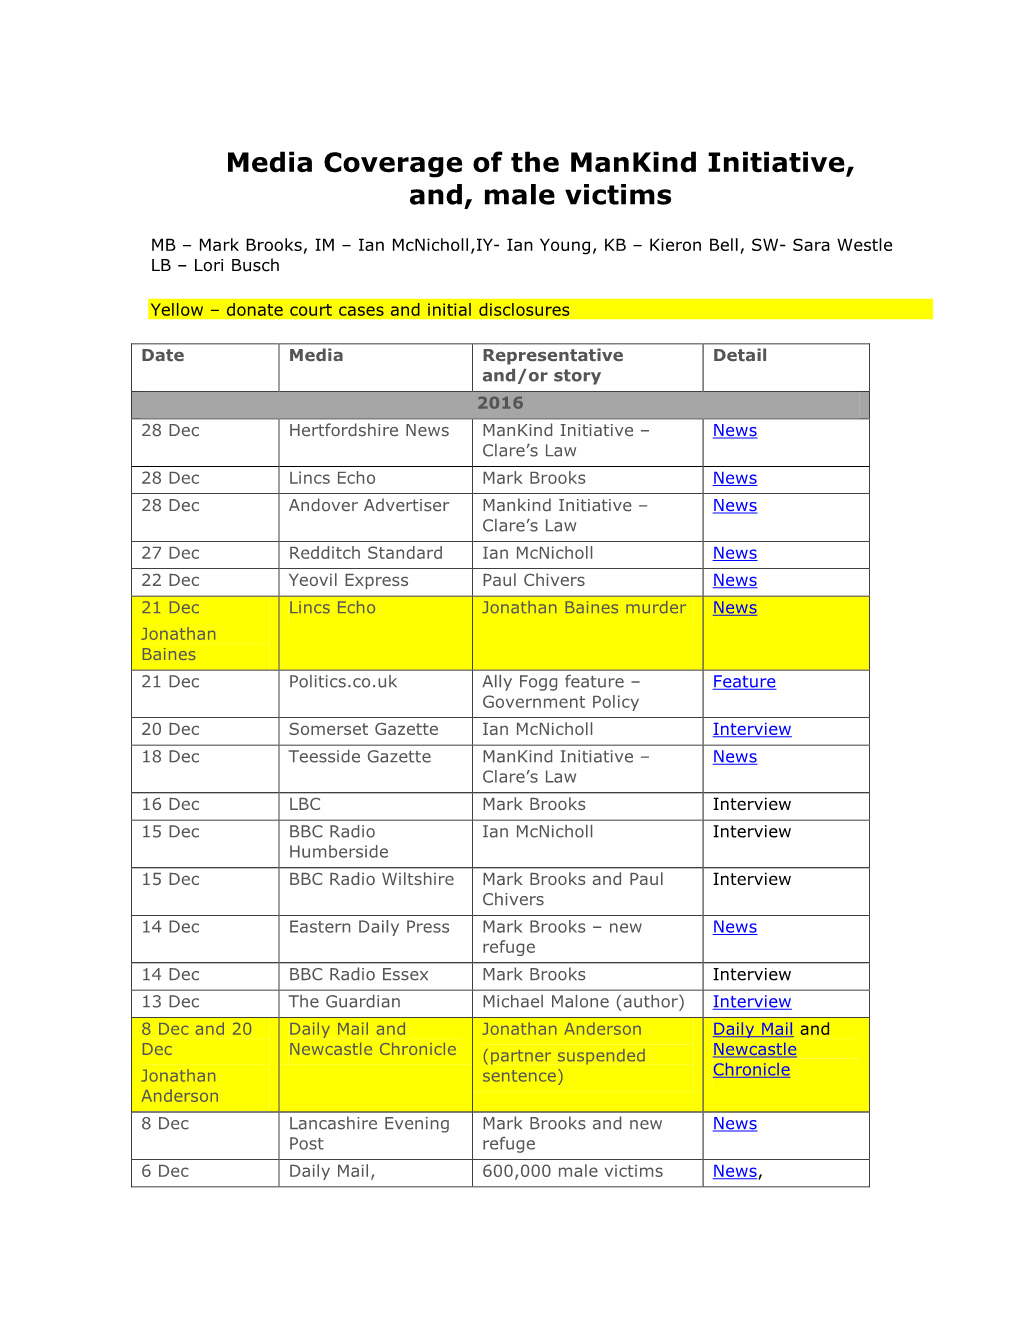 Media Coverage of the Mankind Initiative, And, Male Victims